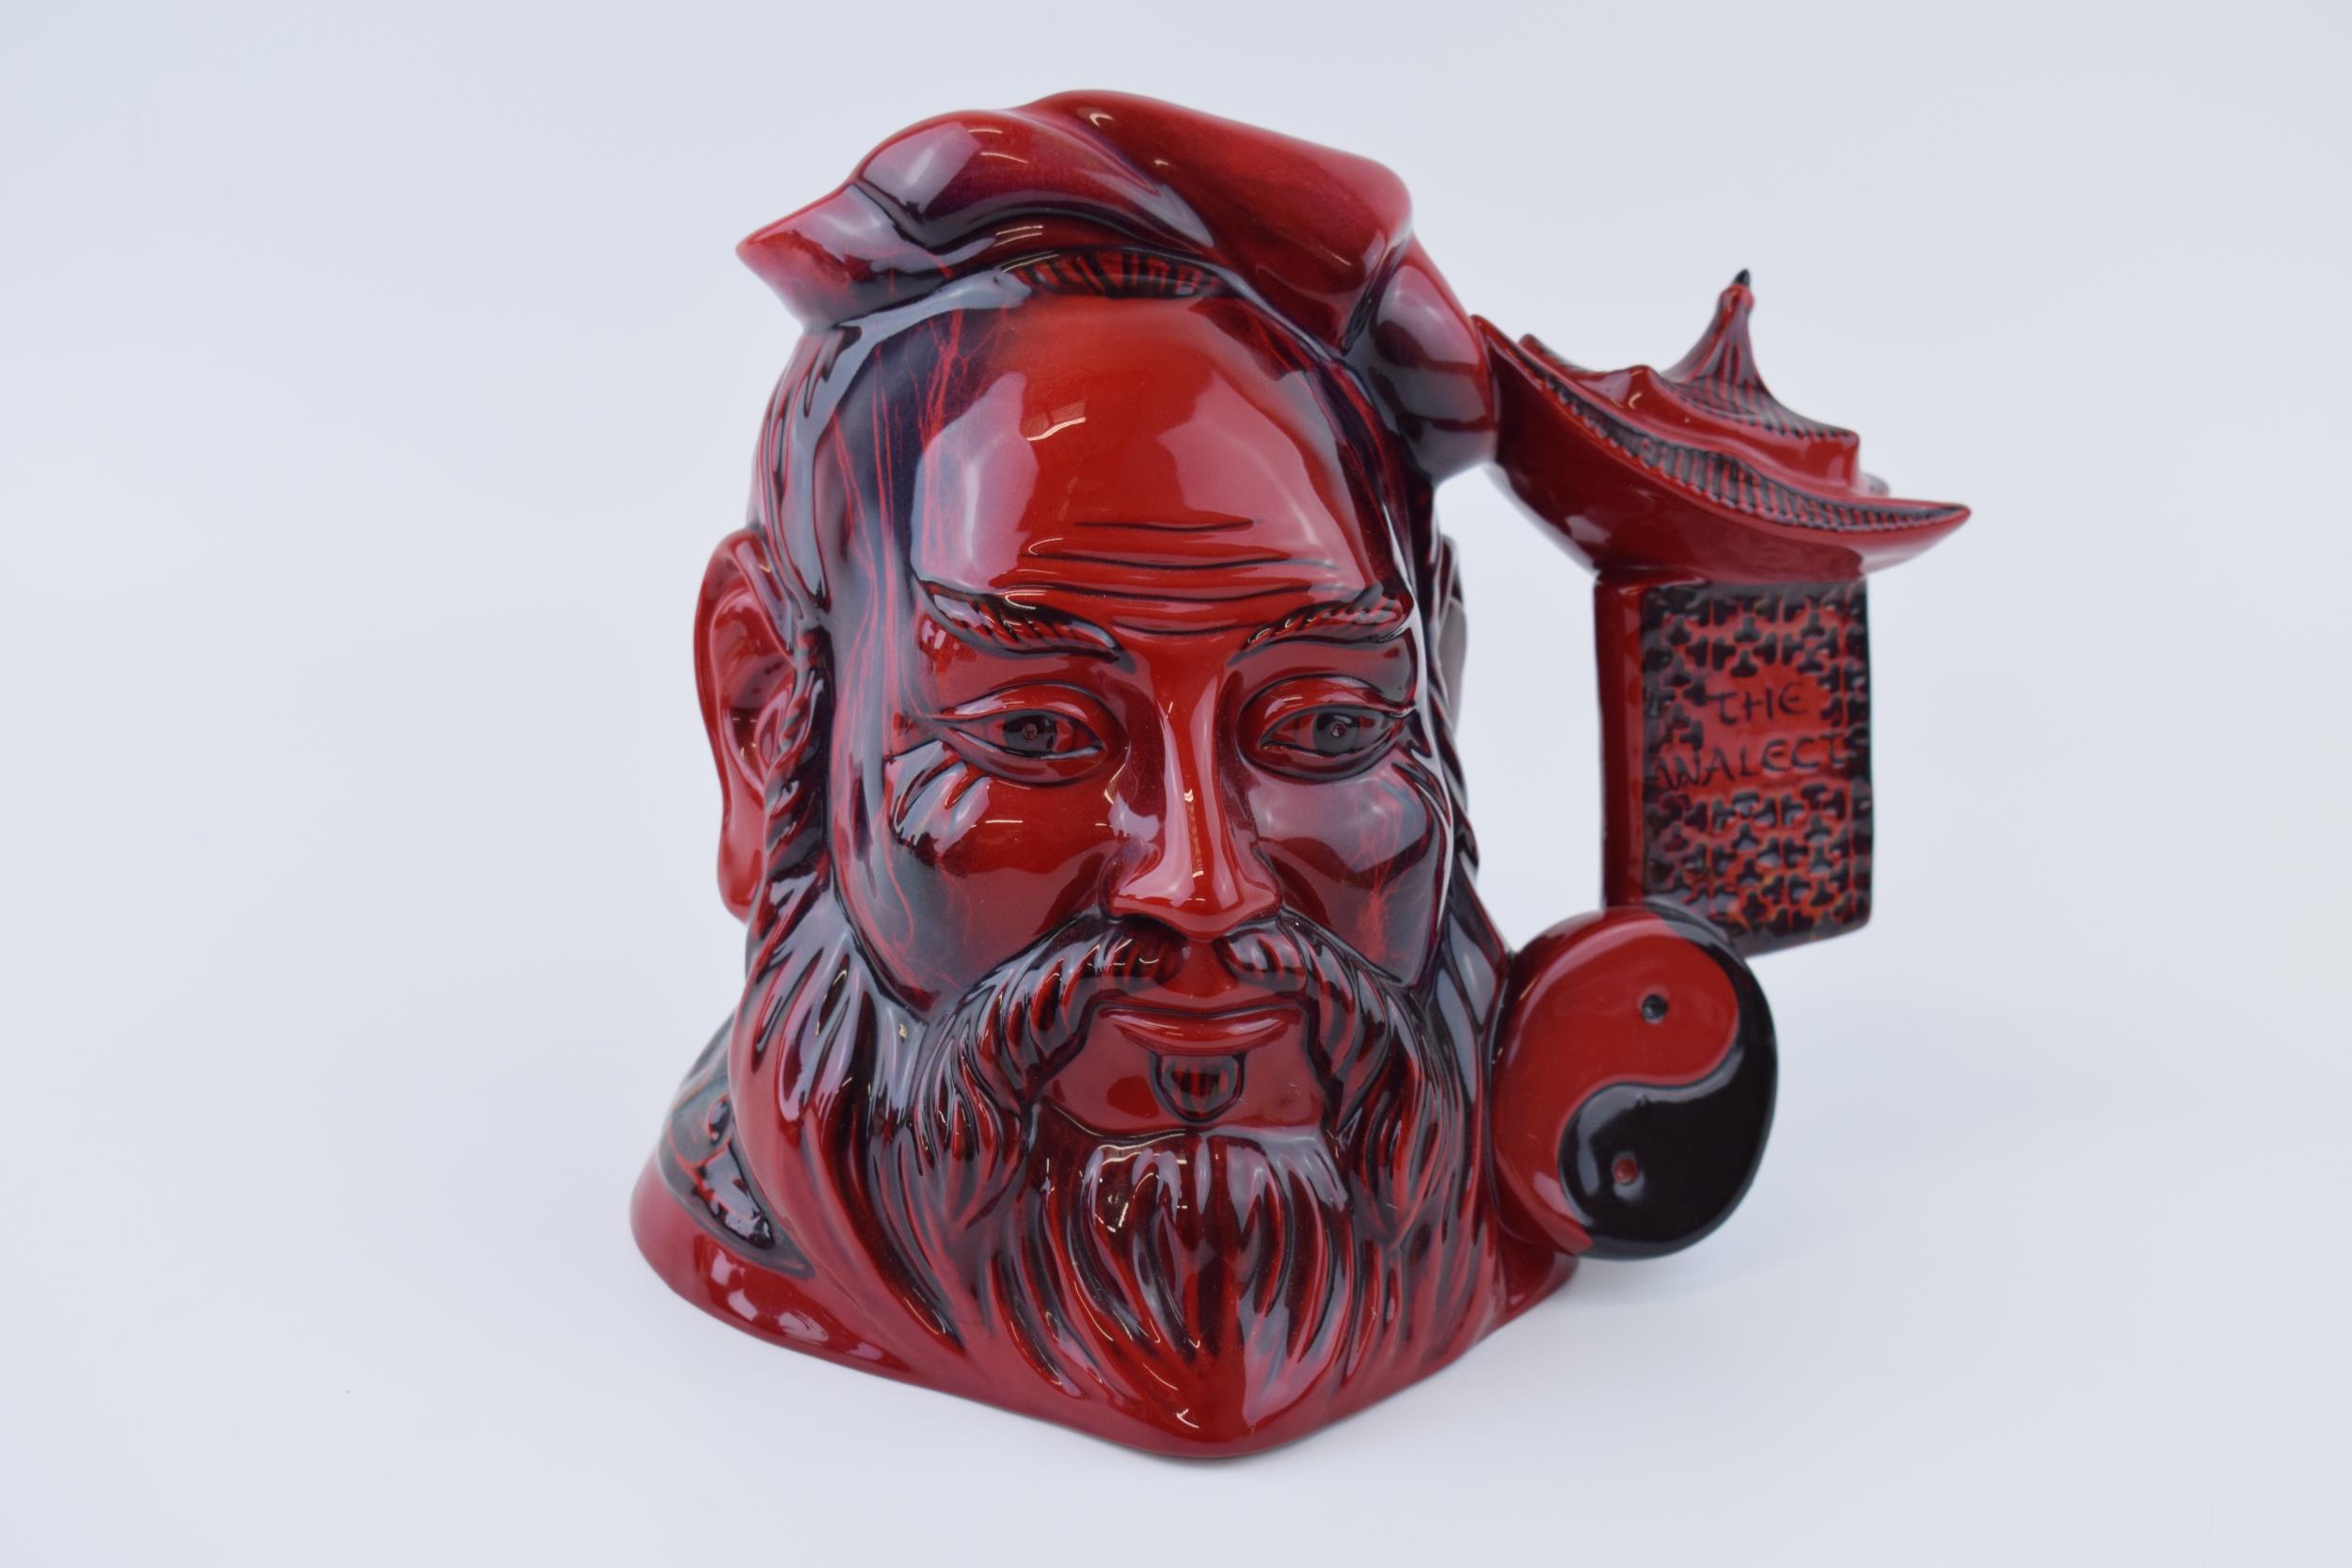 Royal Doulton Flambe character jug Confucius D7003. In good condition with no obvious damage or - Image 2 of 3